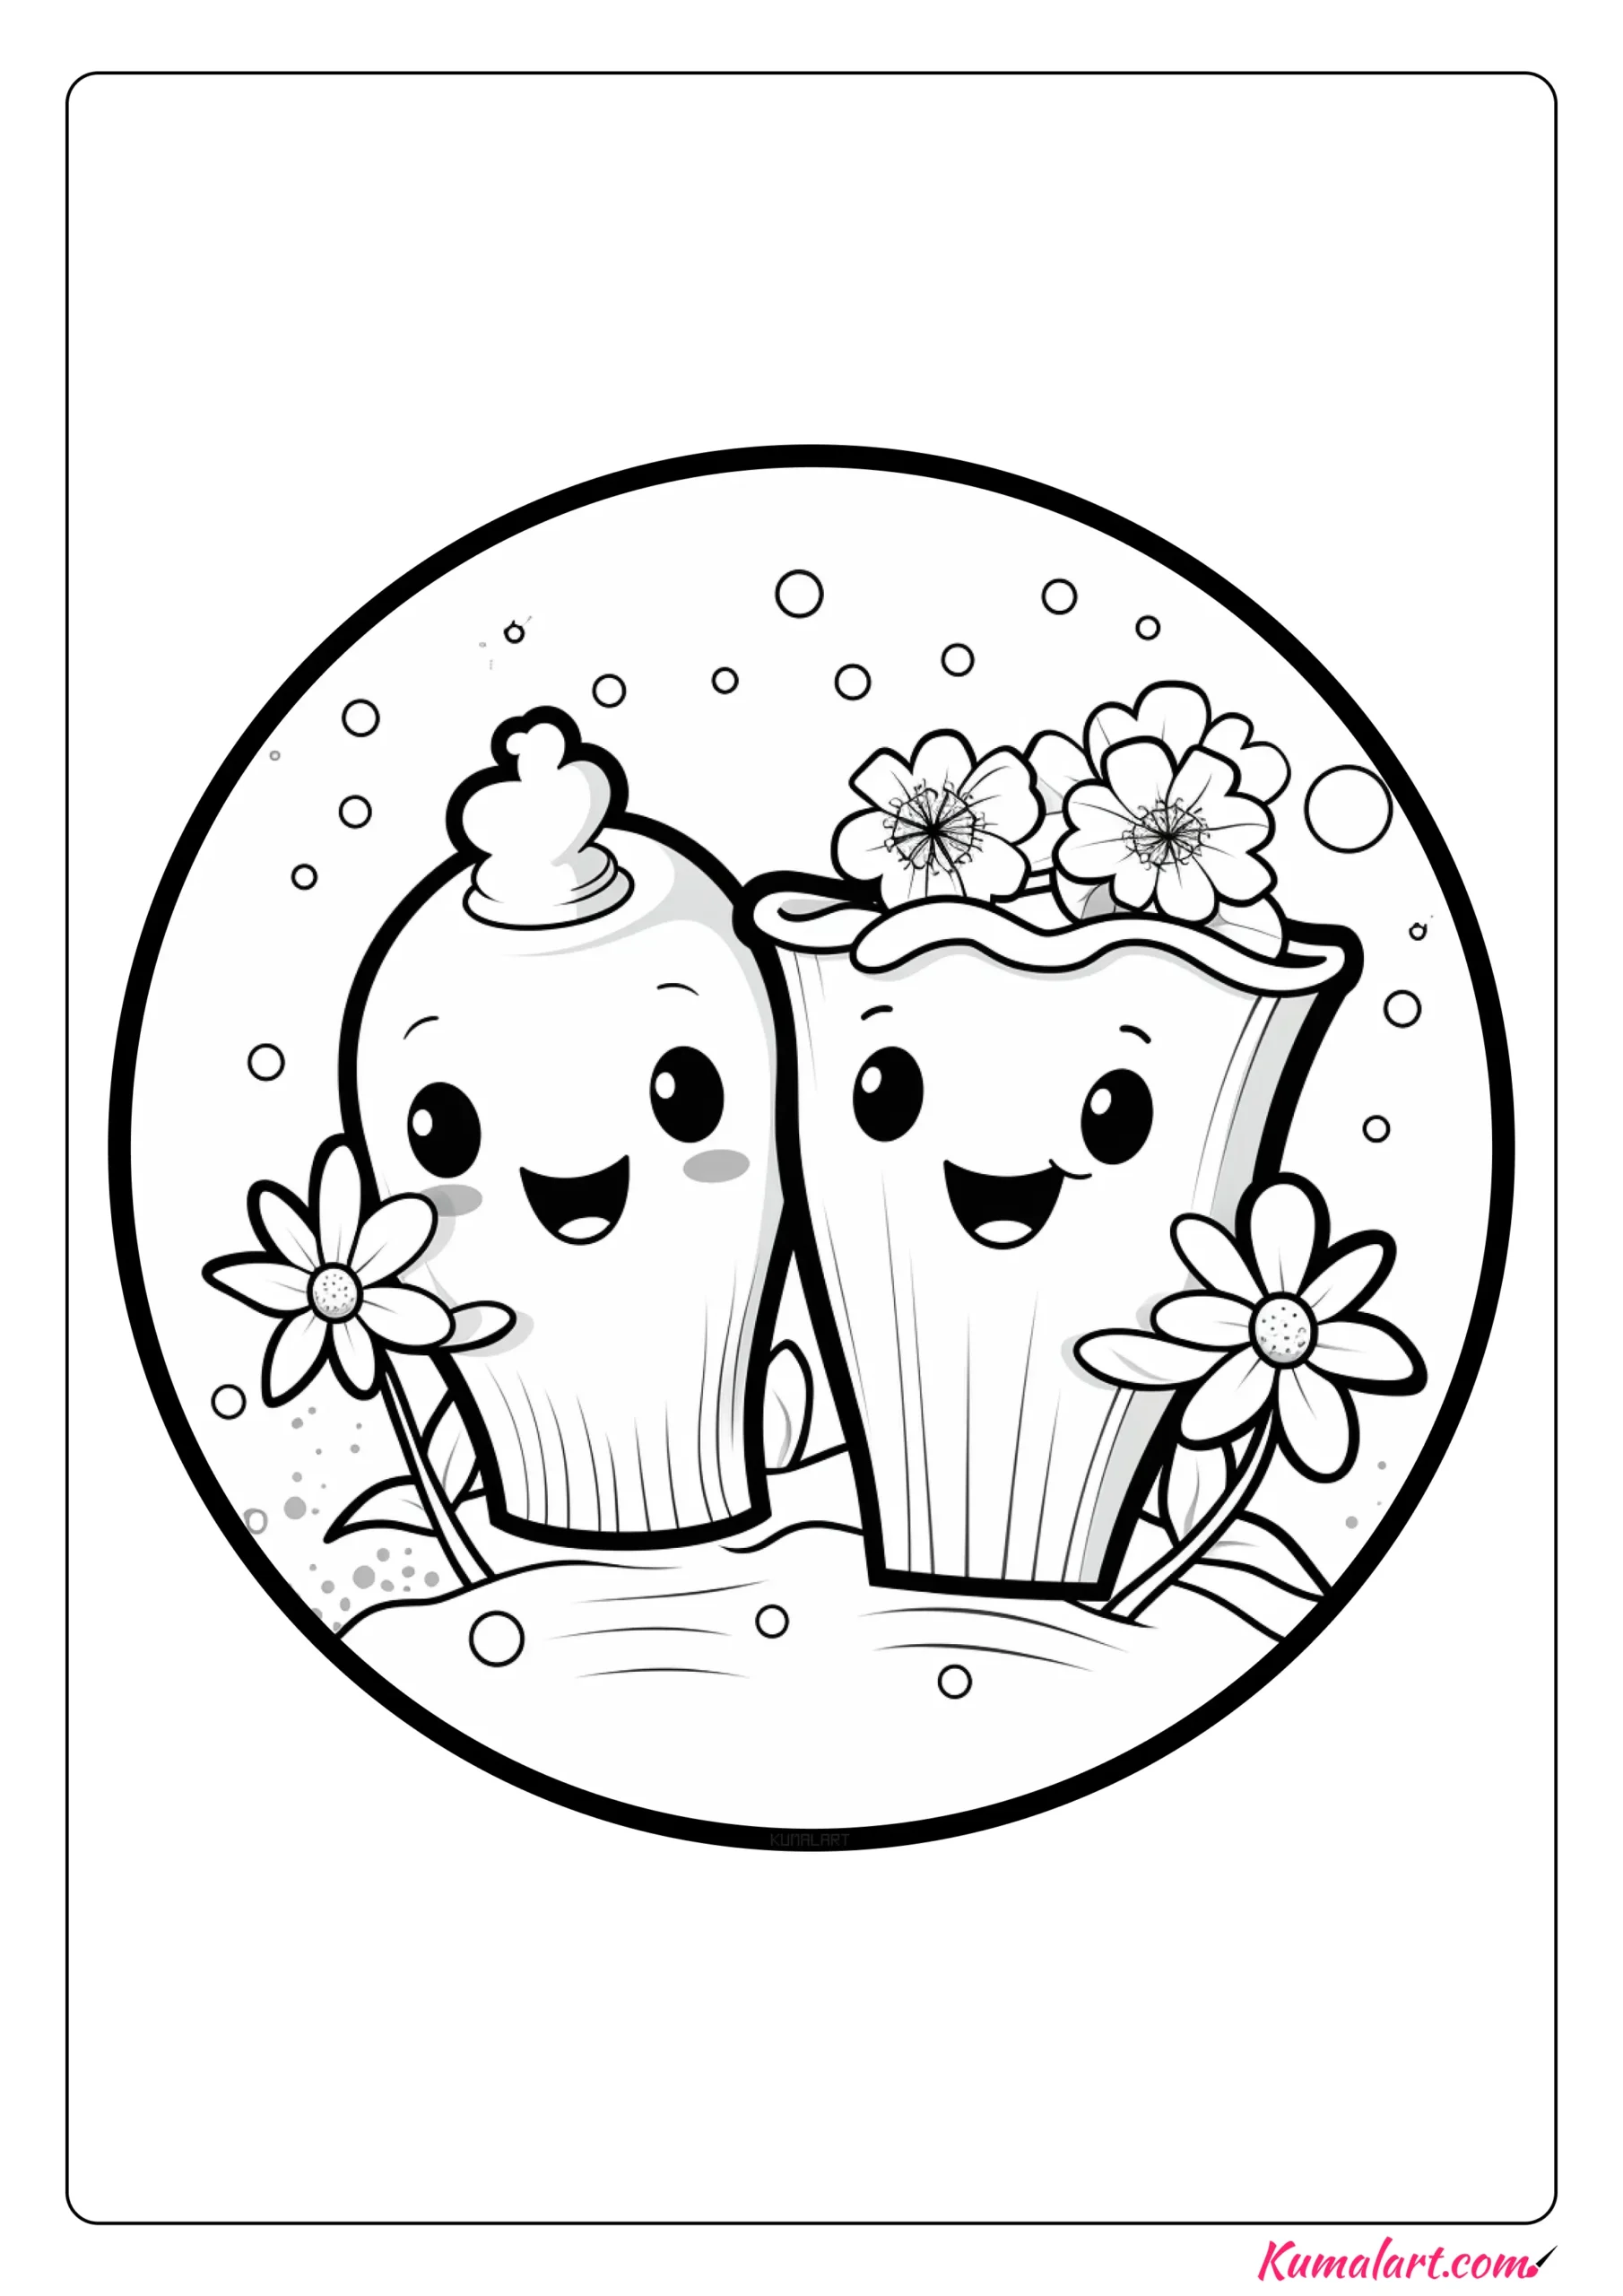 Magnificent Tooth Brushing Coloring Page